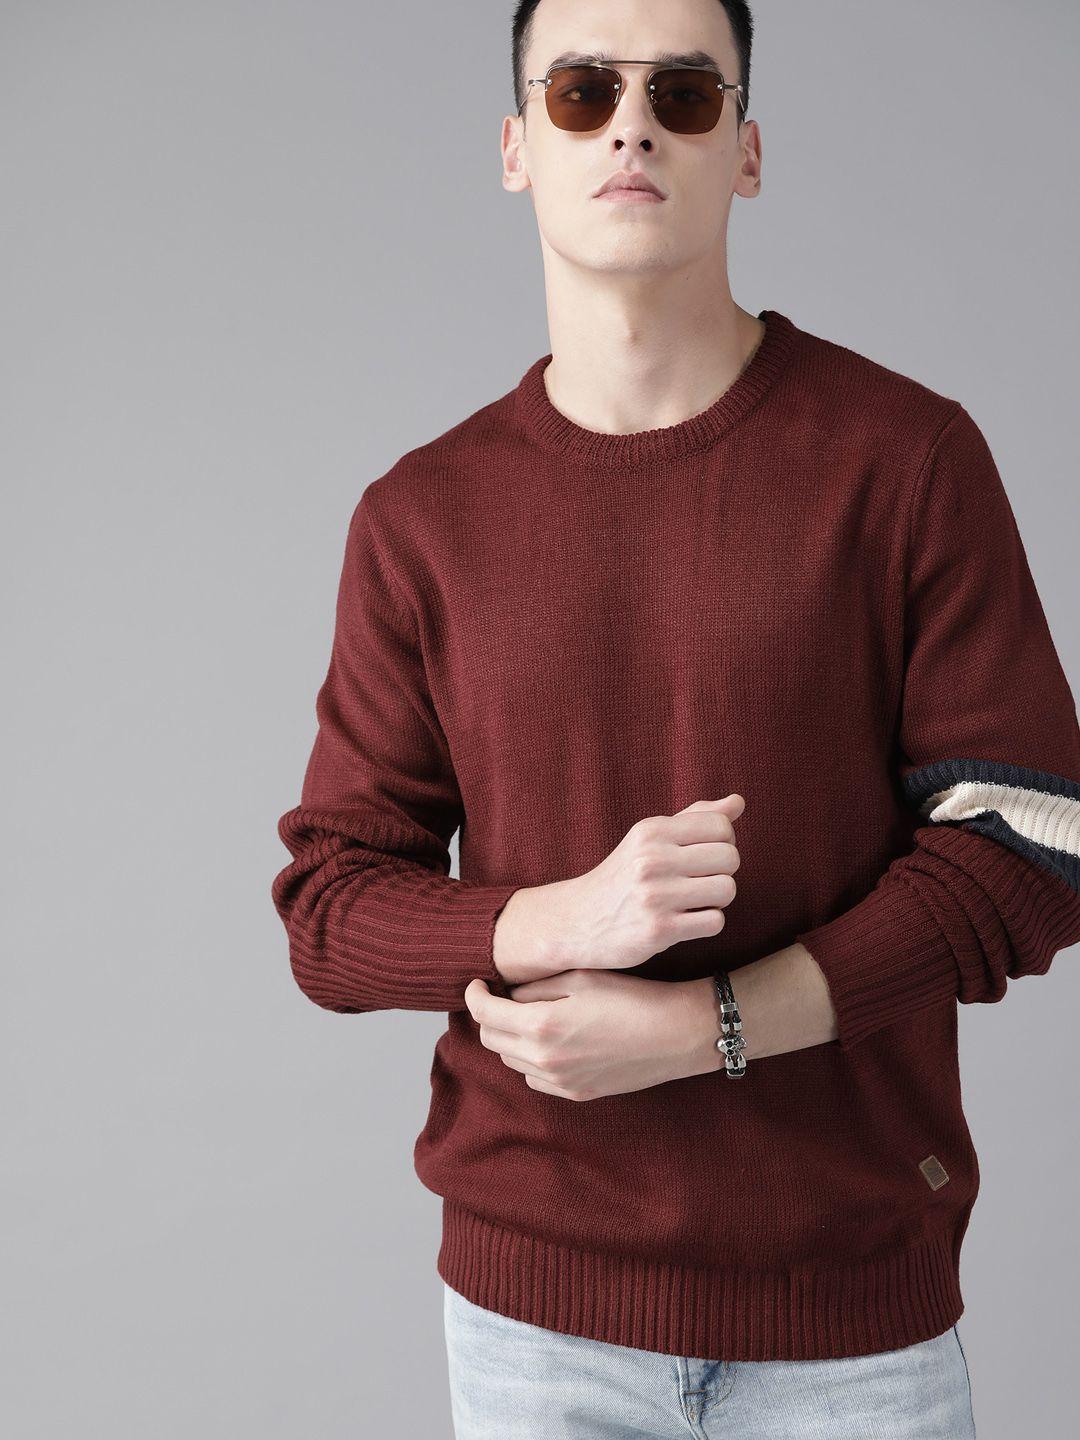 the-roadster-lifestyle-co-men-maroon-solid-sweater